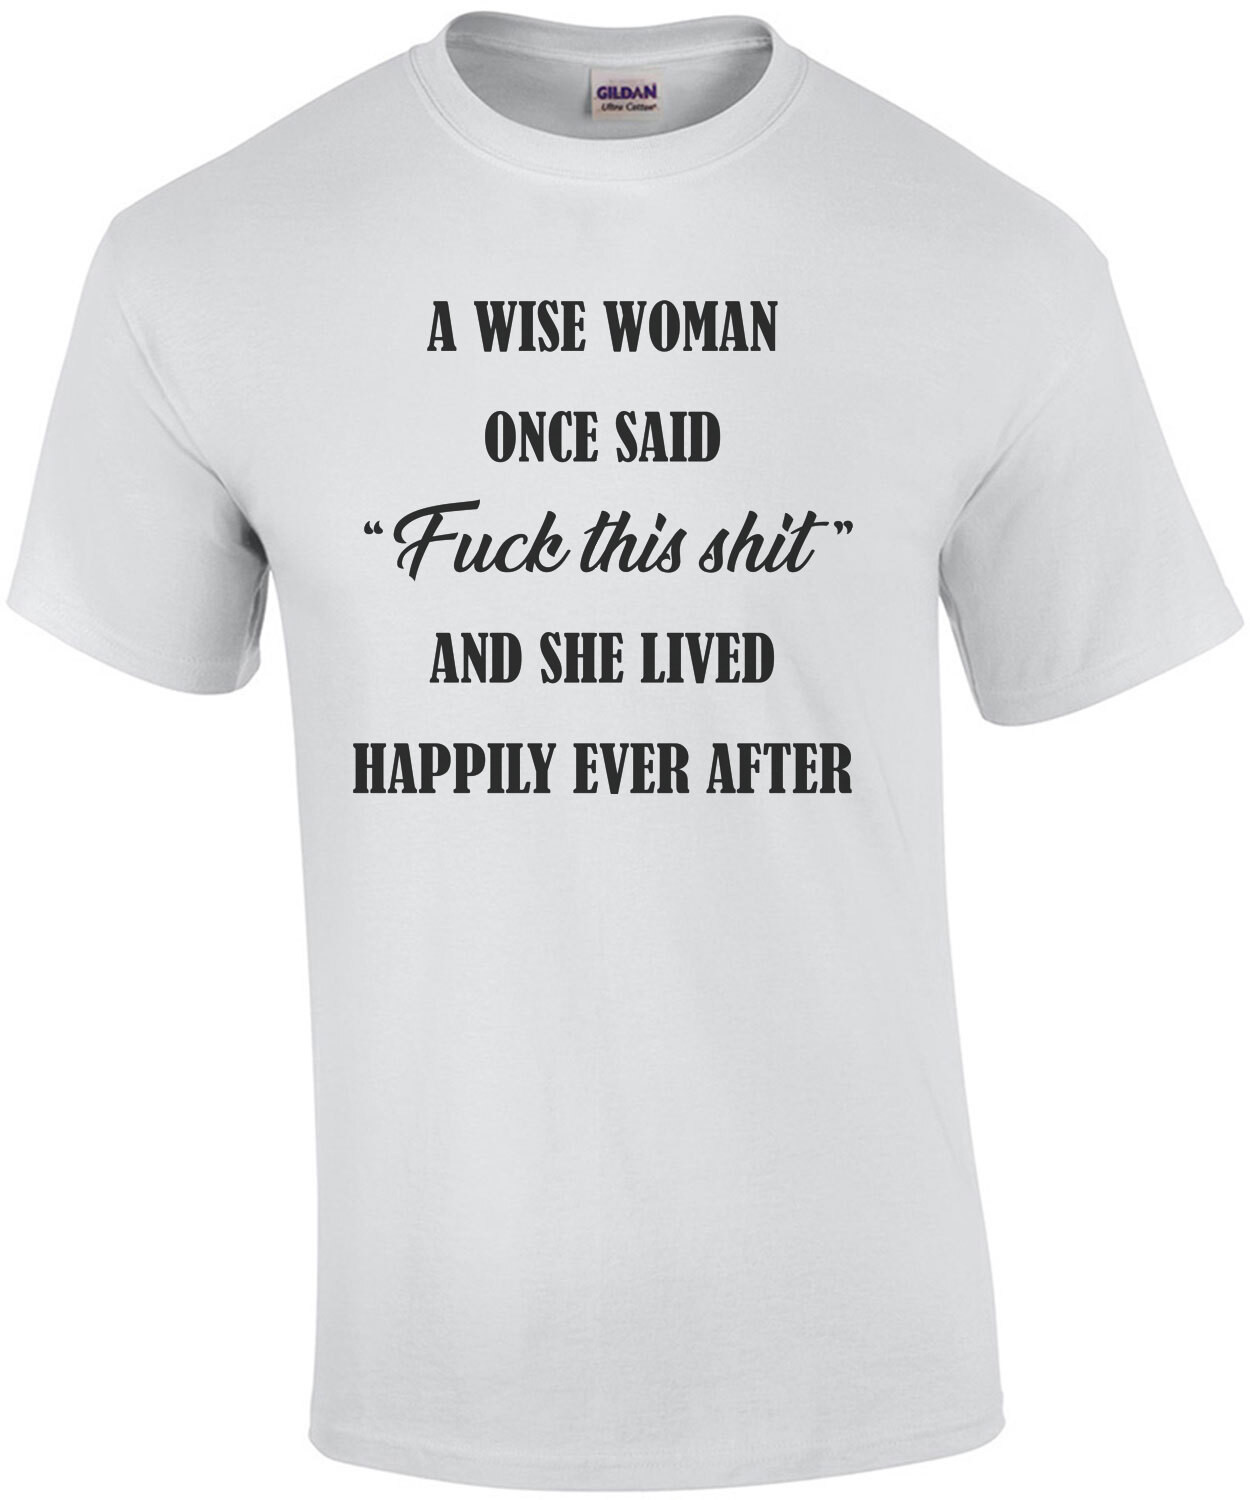 A wise woman once said - fuck this shit - and she lived happily ever after - funny ladies t-shirt